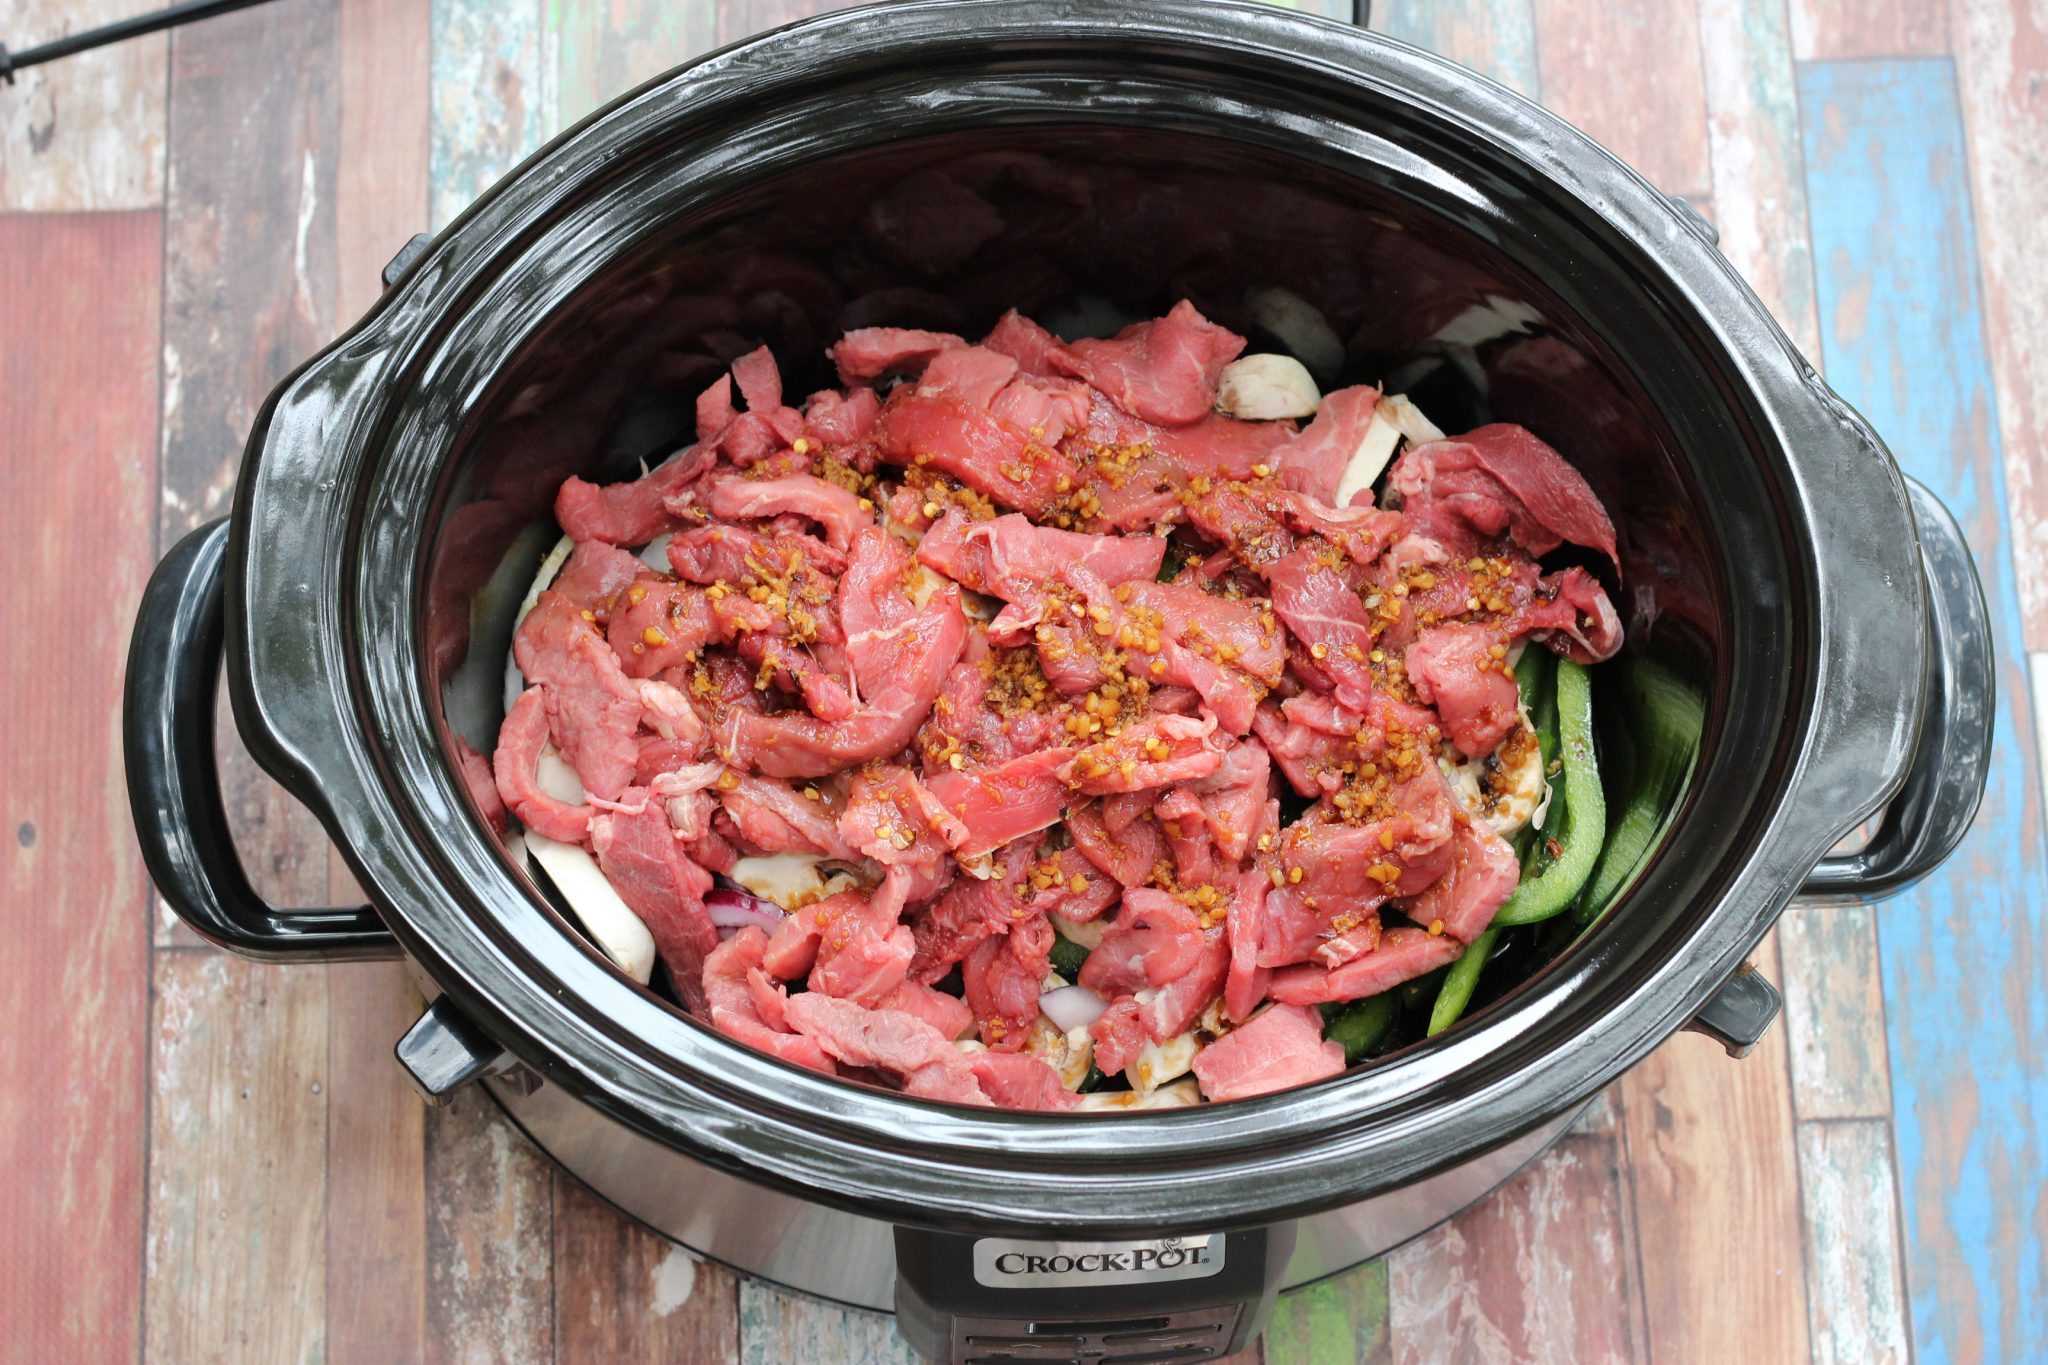 Slow cooker recipes are my favorite way to get dinner on the table. Try this Crock-Pot recipe for Green Pepper Steak for an easy dinner. You'll fall in love with Crockpot meals live I have!